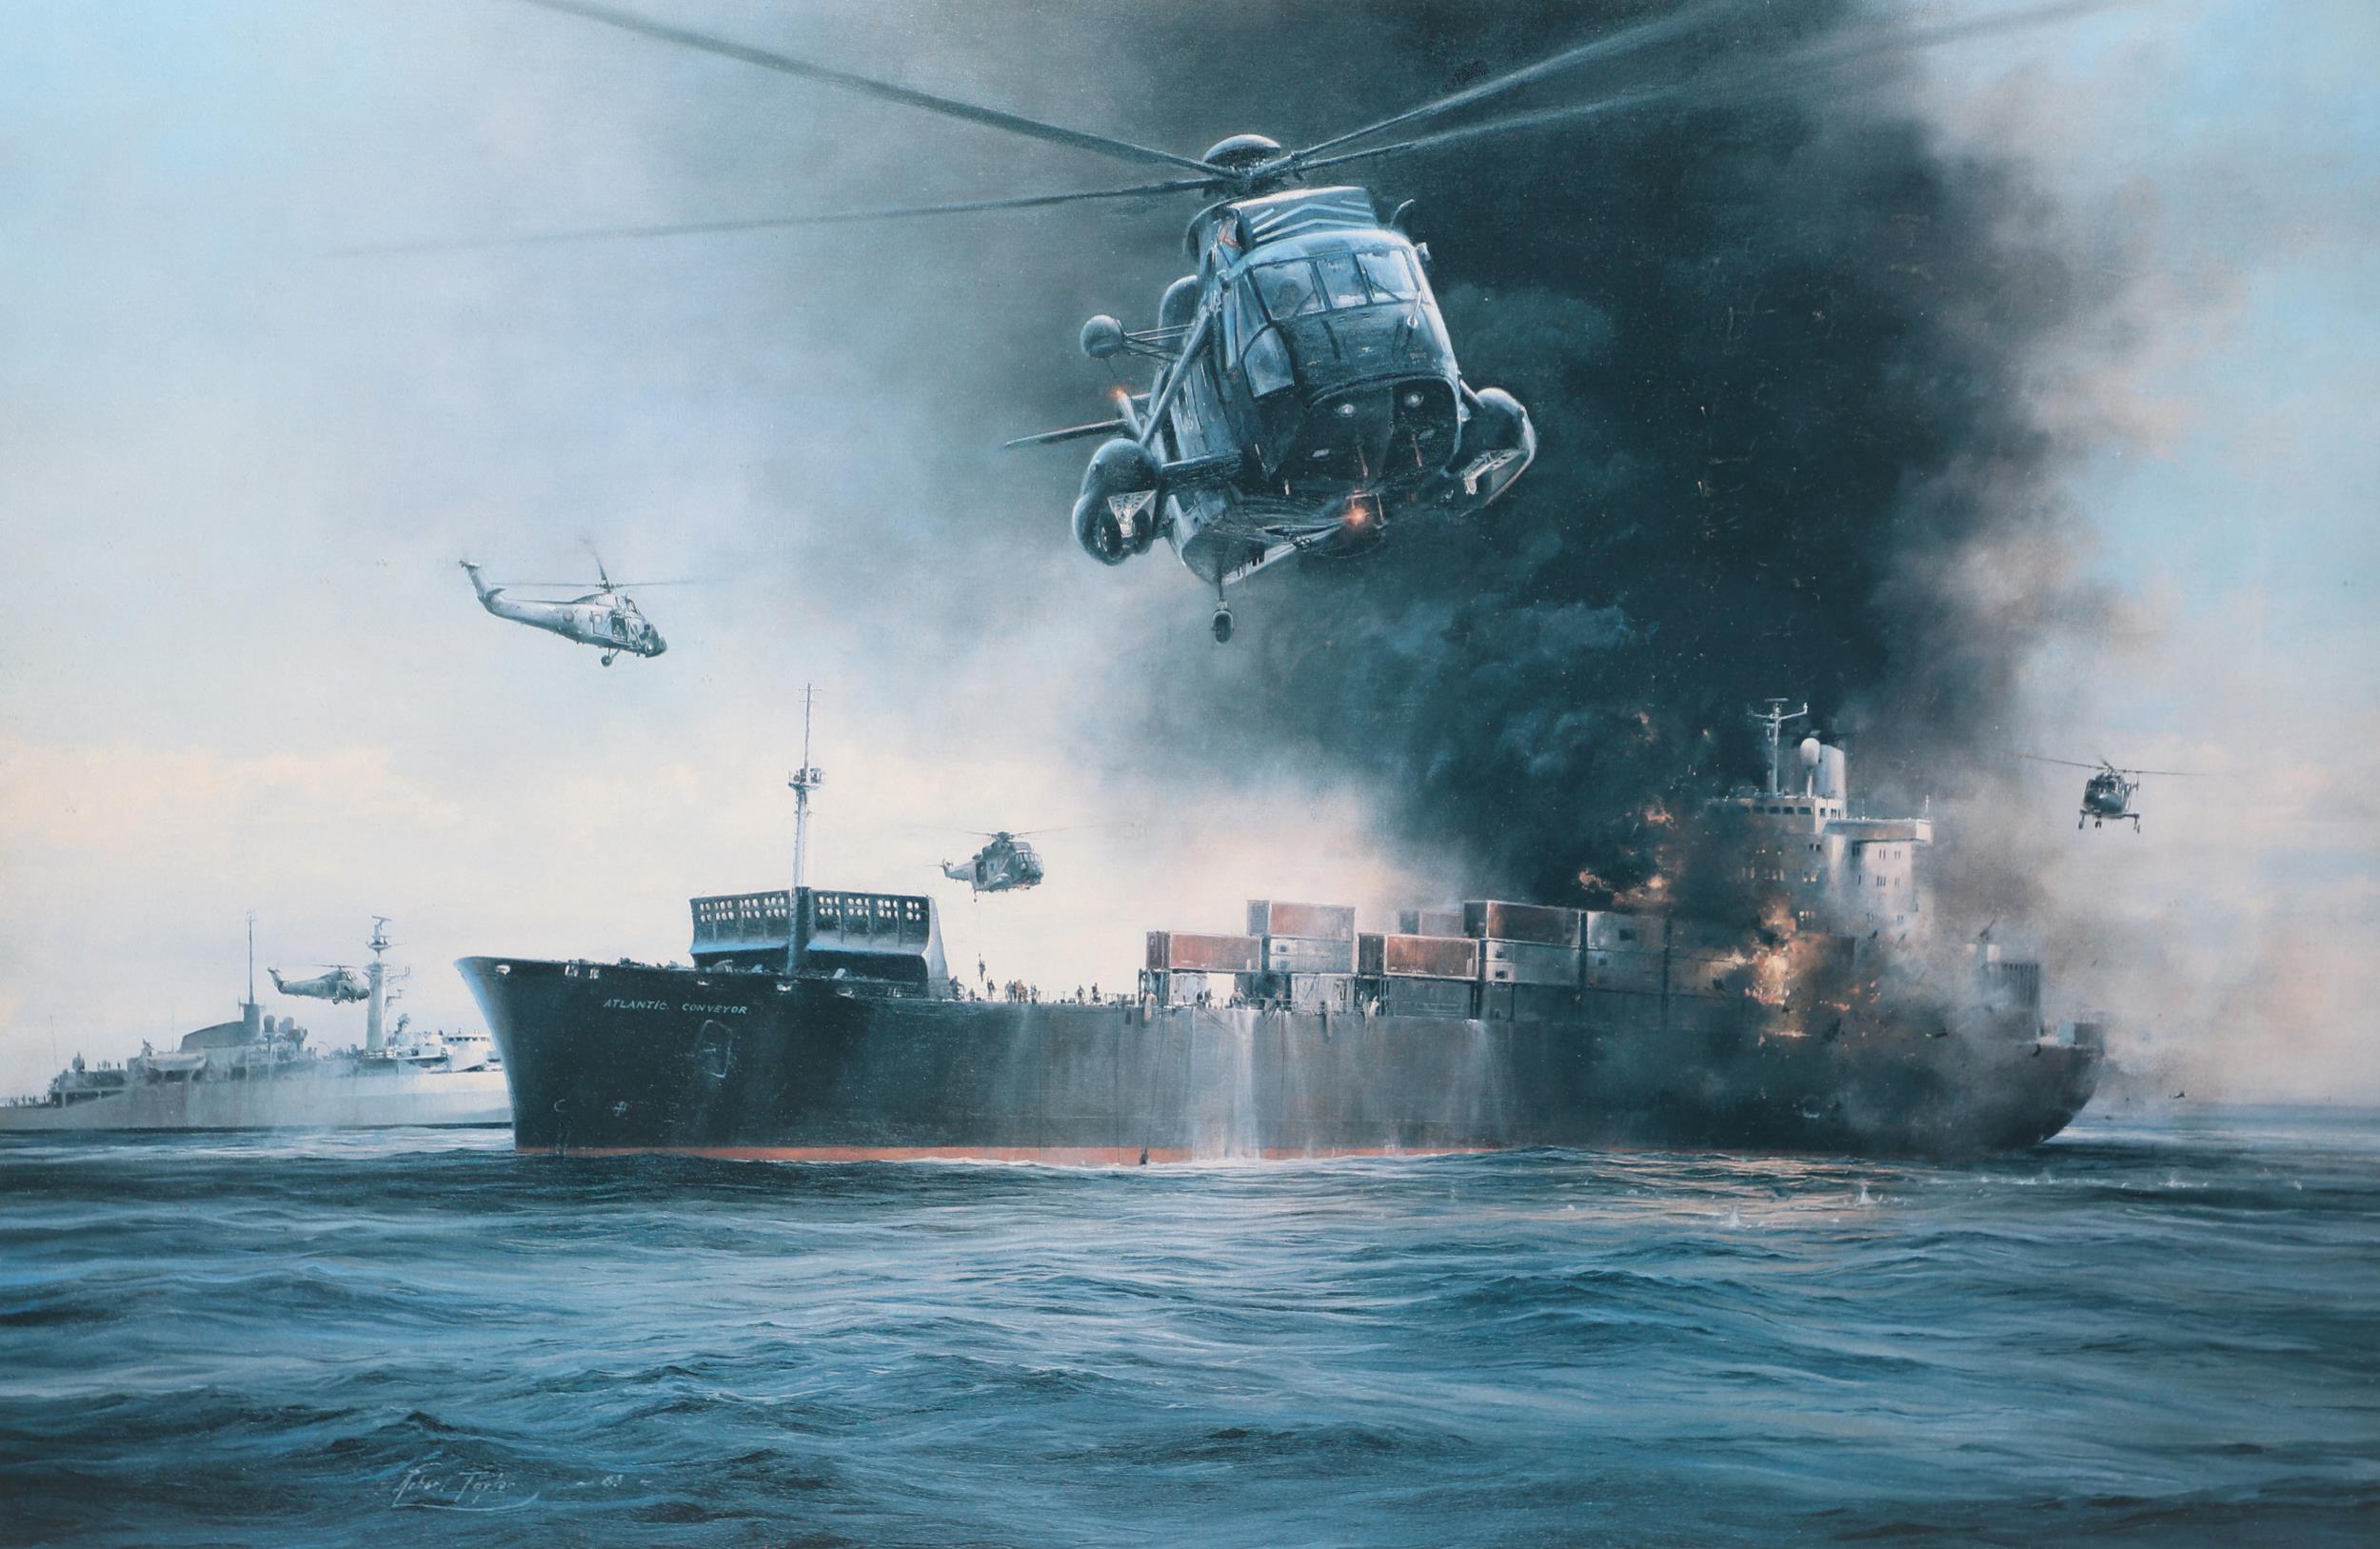 SEA KING RESCUE' AFTER ROBERT TAYLOR AND ANOTHER FLAKLANDS THEMED PRINT. - Bild 3 aus 11